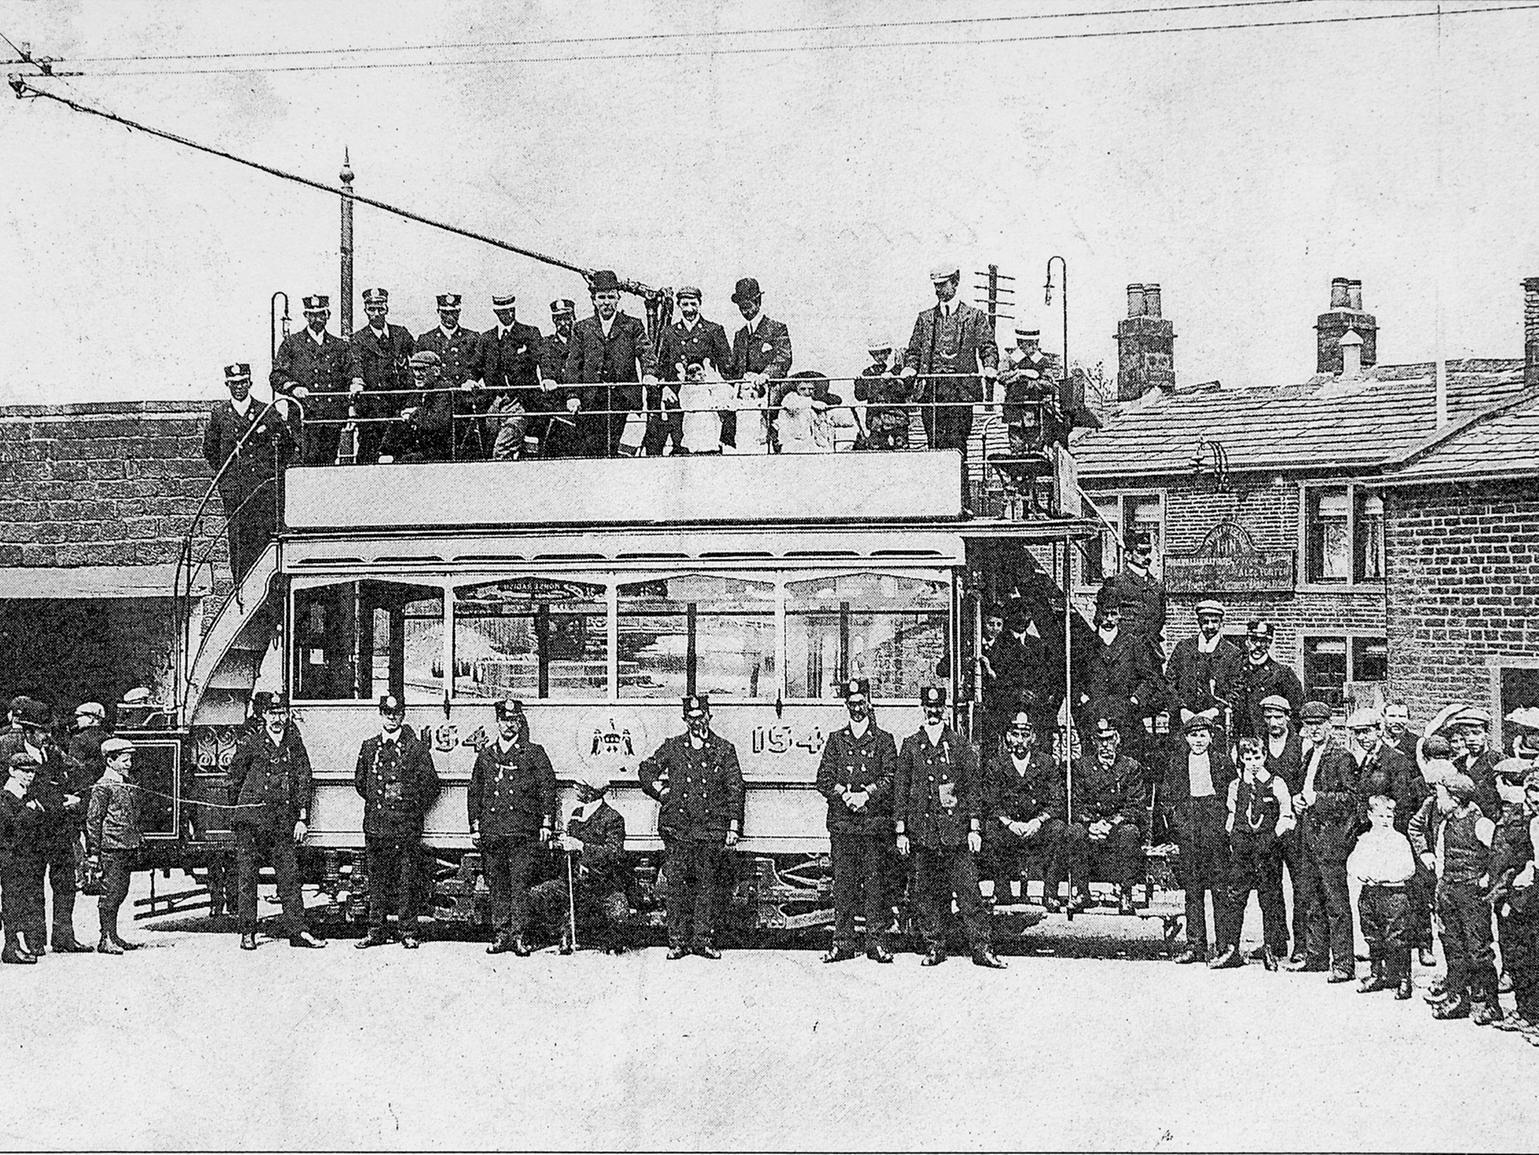 These smartly turned out Leeds City Transport employees turned up on the first electric tram to Rodley. Behind the tram and to the right was the Three Horseshoes pub, later renamed as the Rodley Barge.